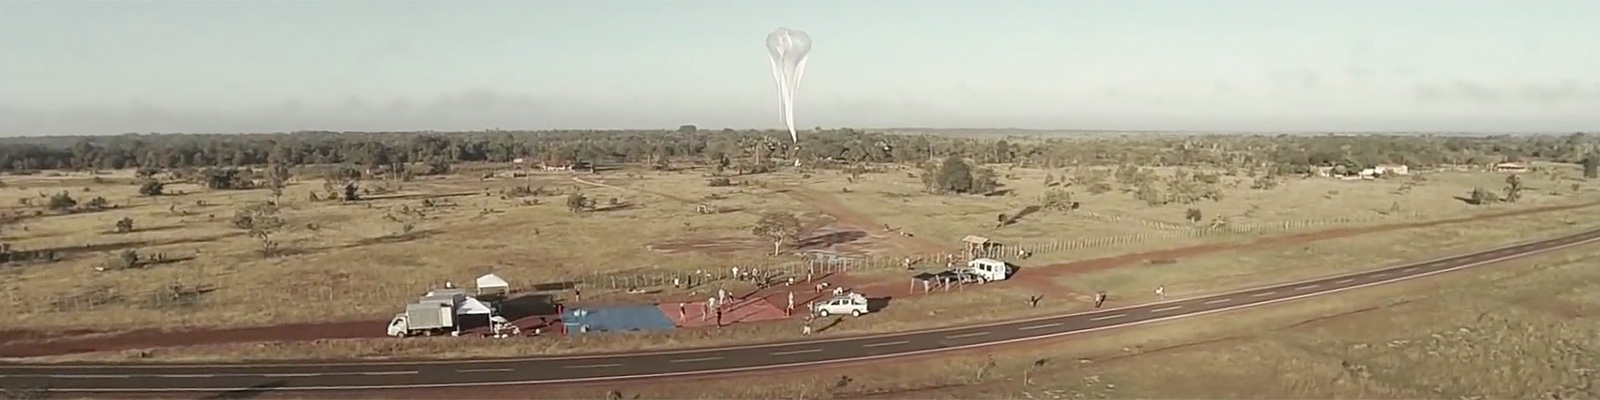 Project Loon　The Brazil Test